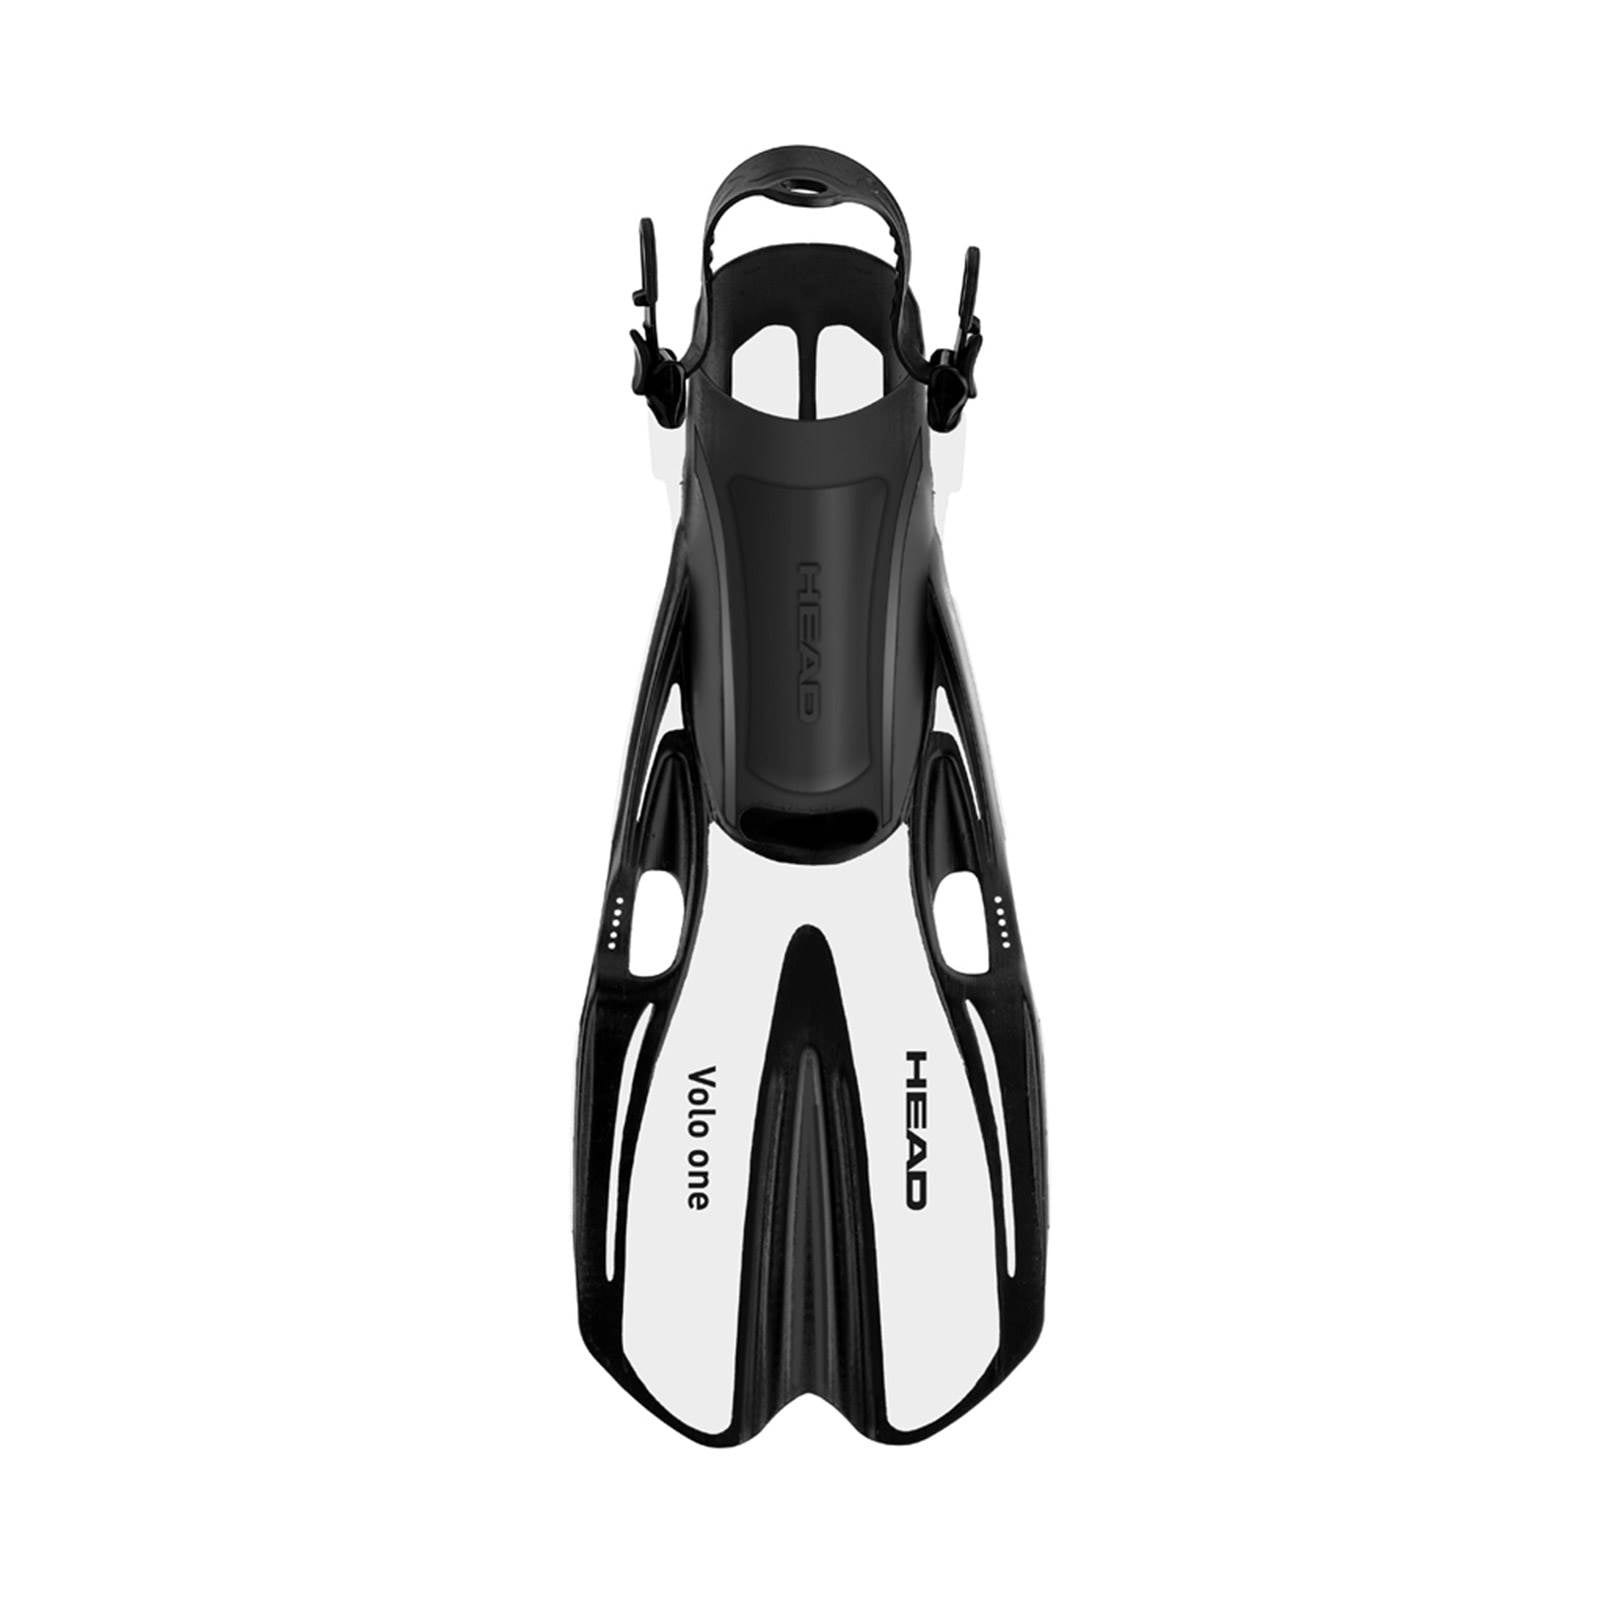 Head Volo One Snorkeling Swim Fin With Mesh Carry Bag 